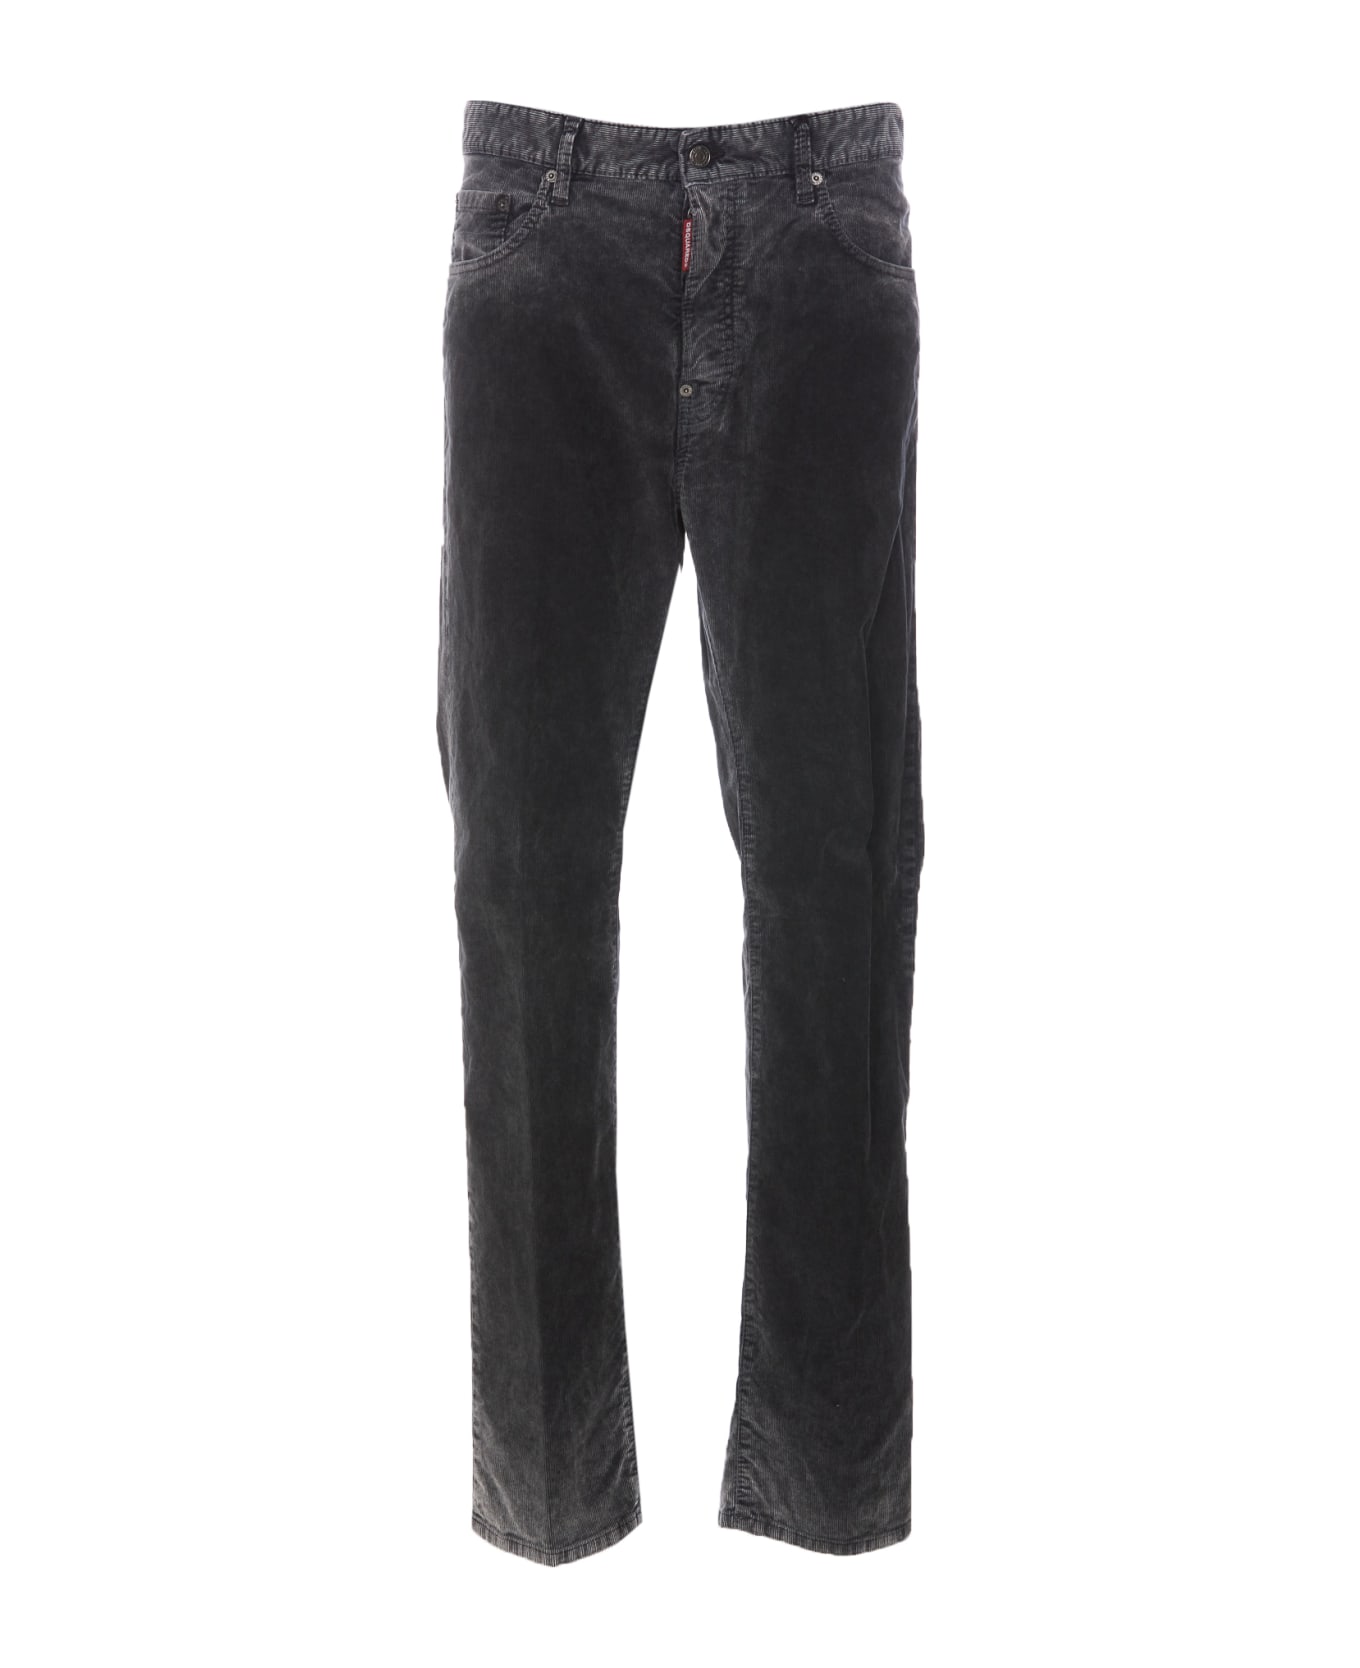 Dsquared2 Corduroy Trousers - Black ボトムス